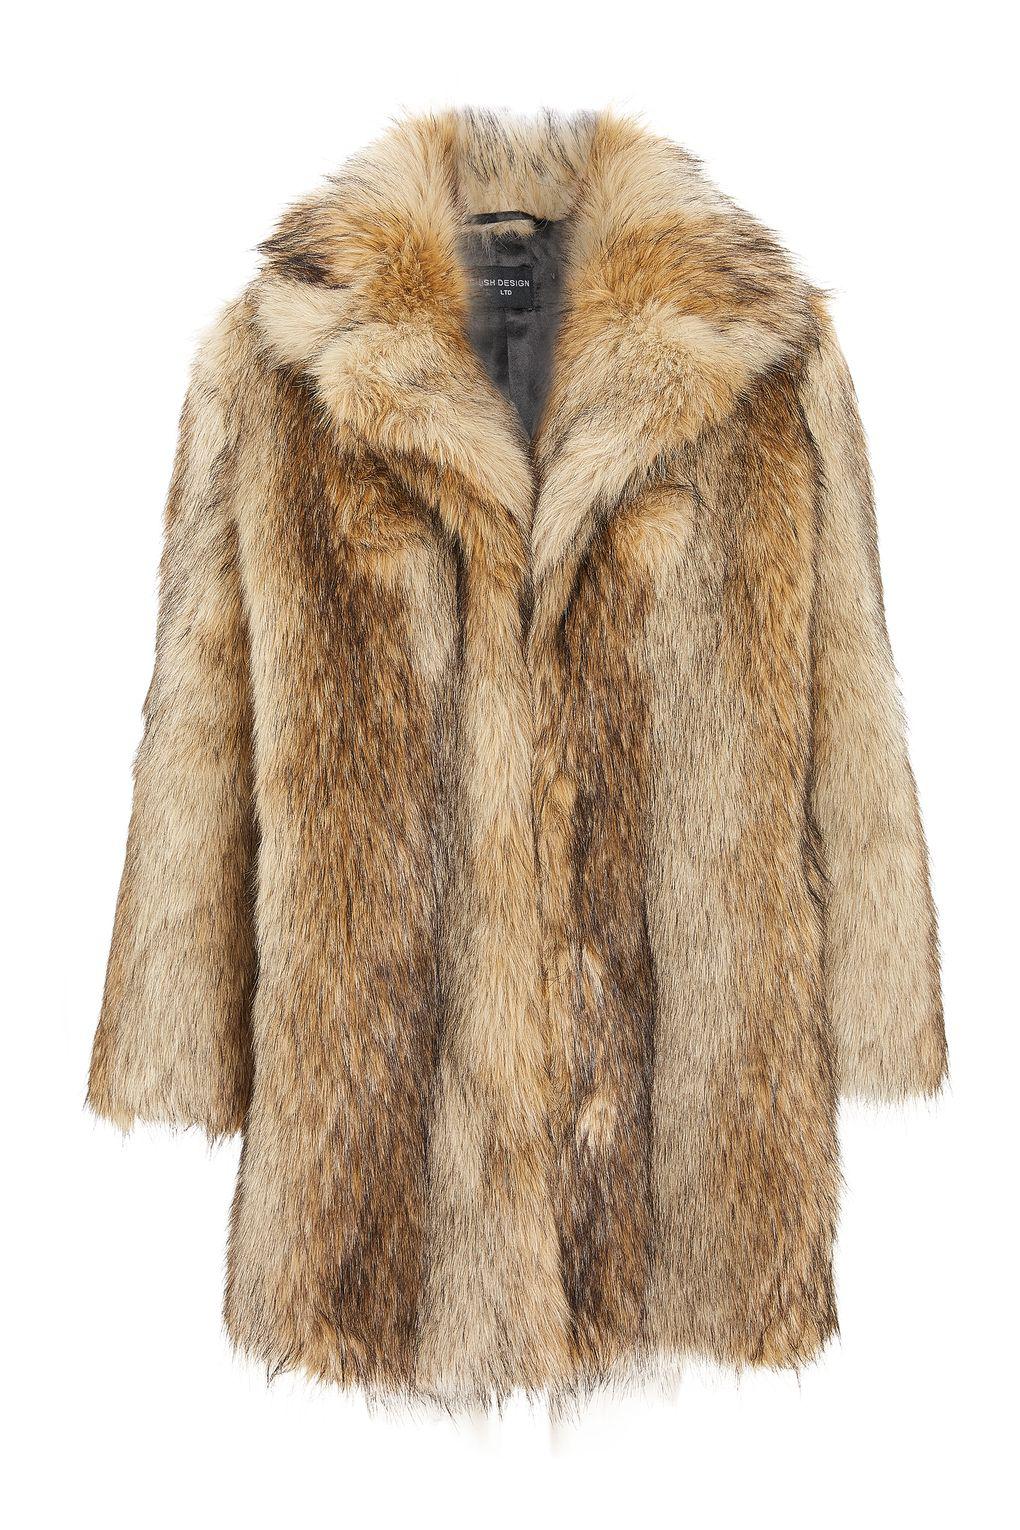 TOPSHOP Synthetic Ultimate Vintage Faux Fur Coat in Brown - Lyst